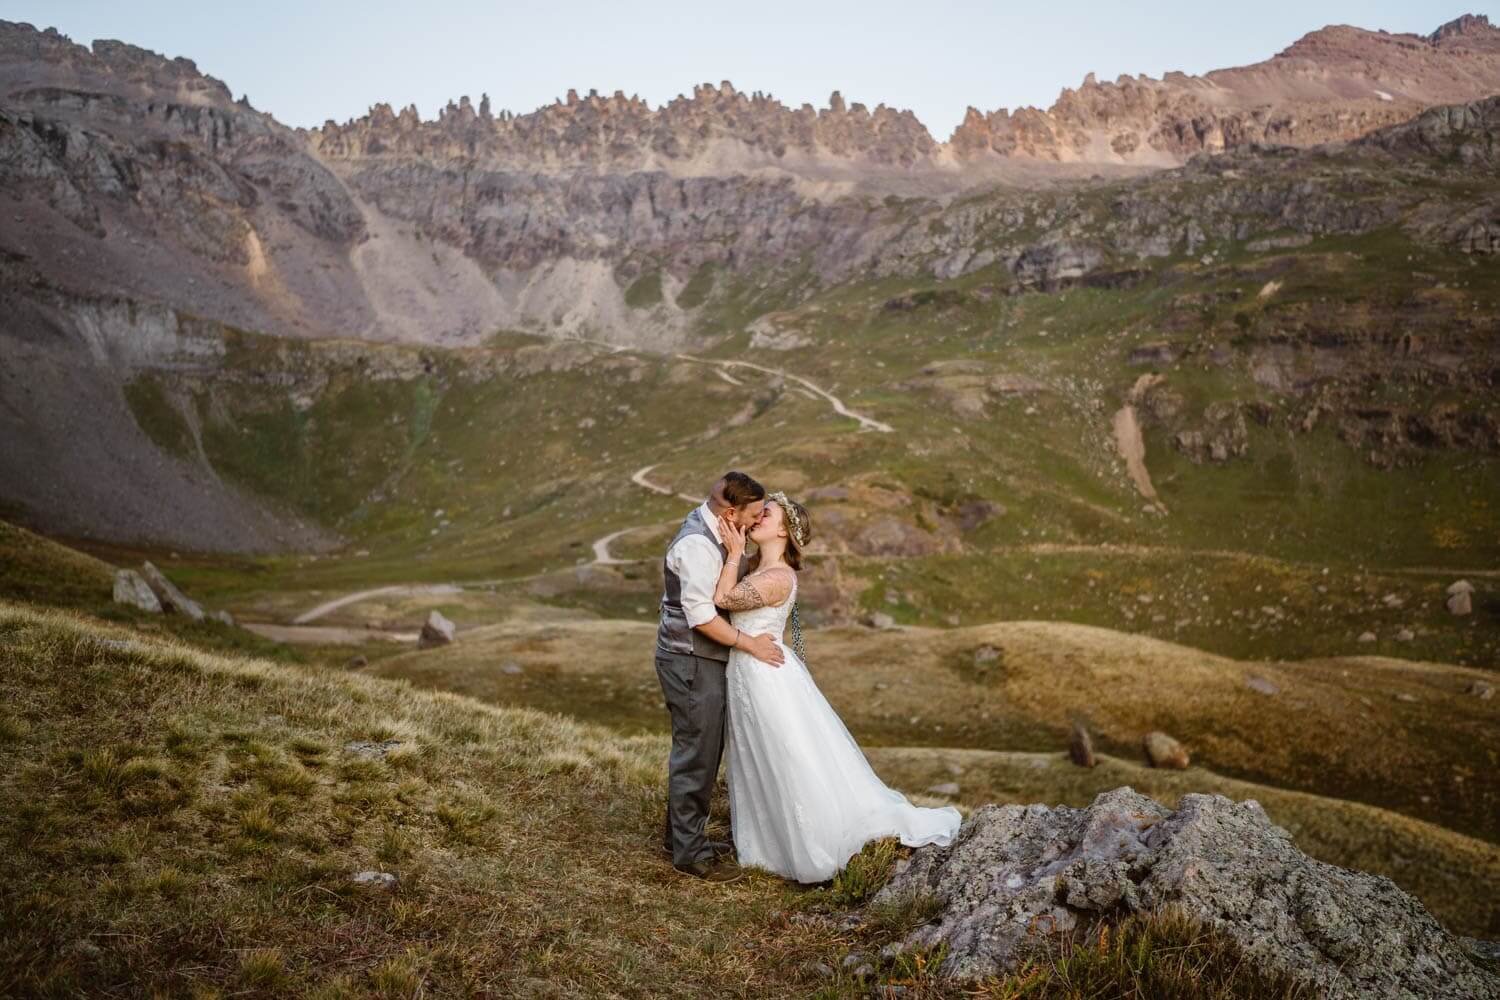 A couple sharing a kissing in their wedding attire in the mountains.